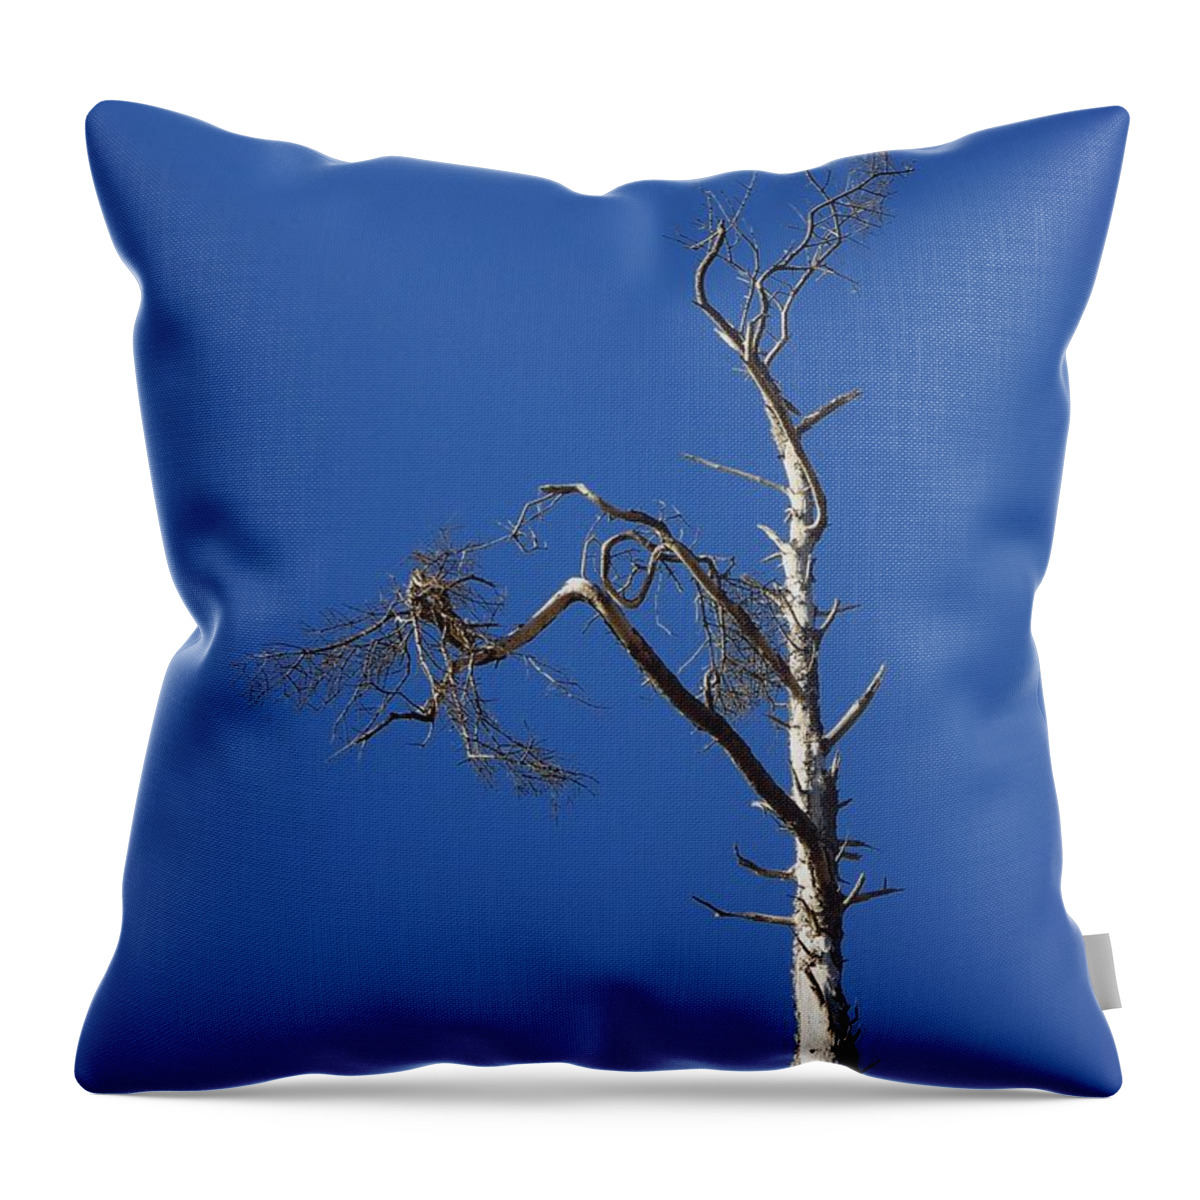 Weathered Tree Throw Pillow featuring the photograph Wind Warrior by Julie Rauscher